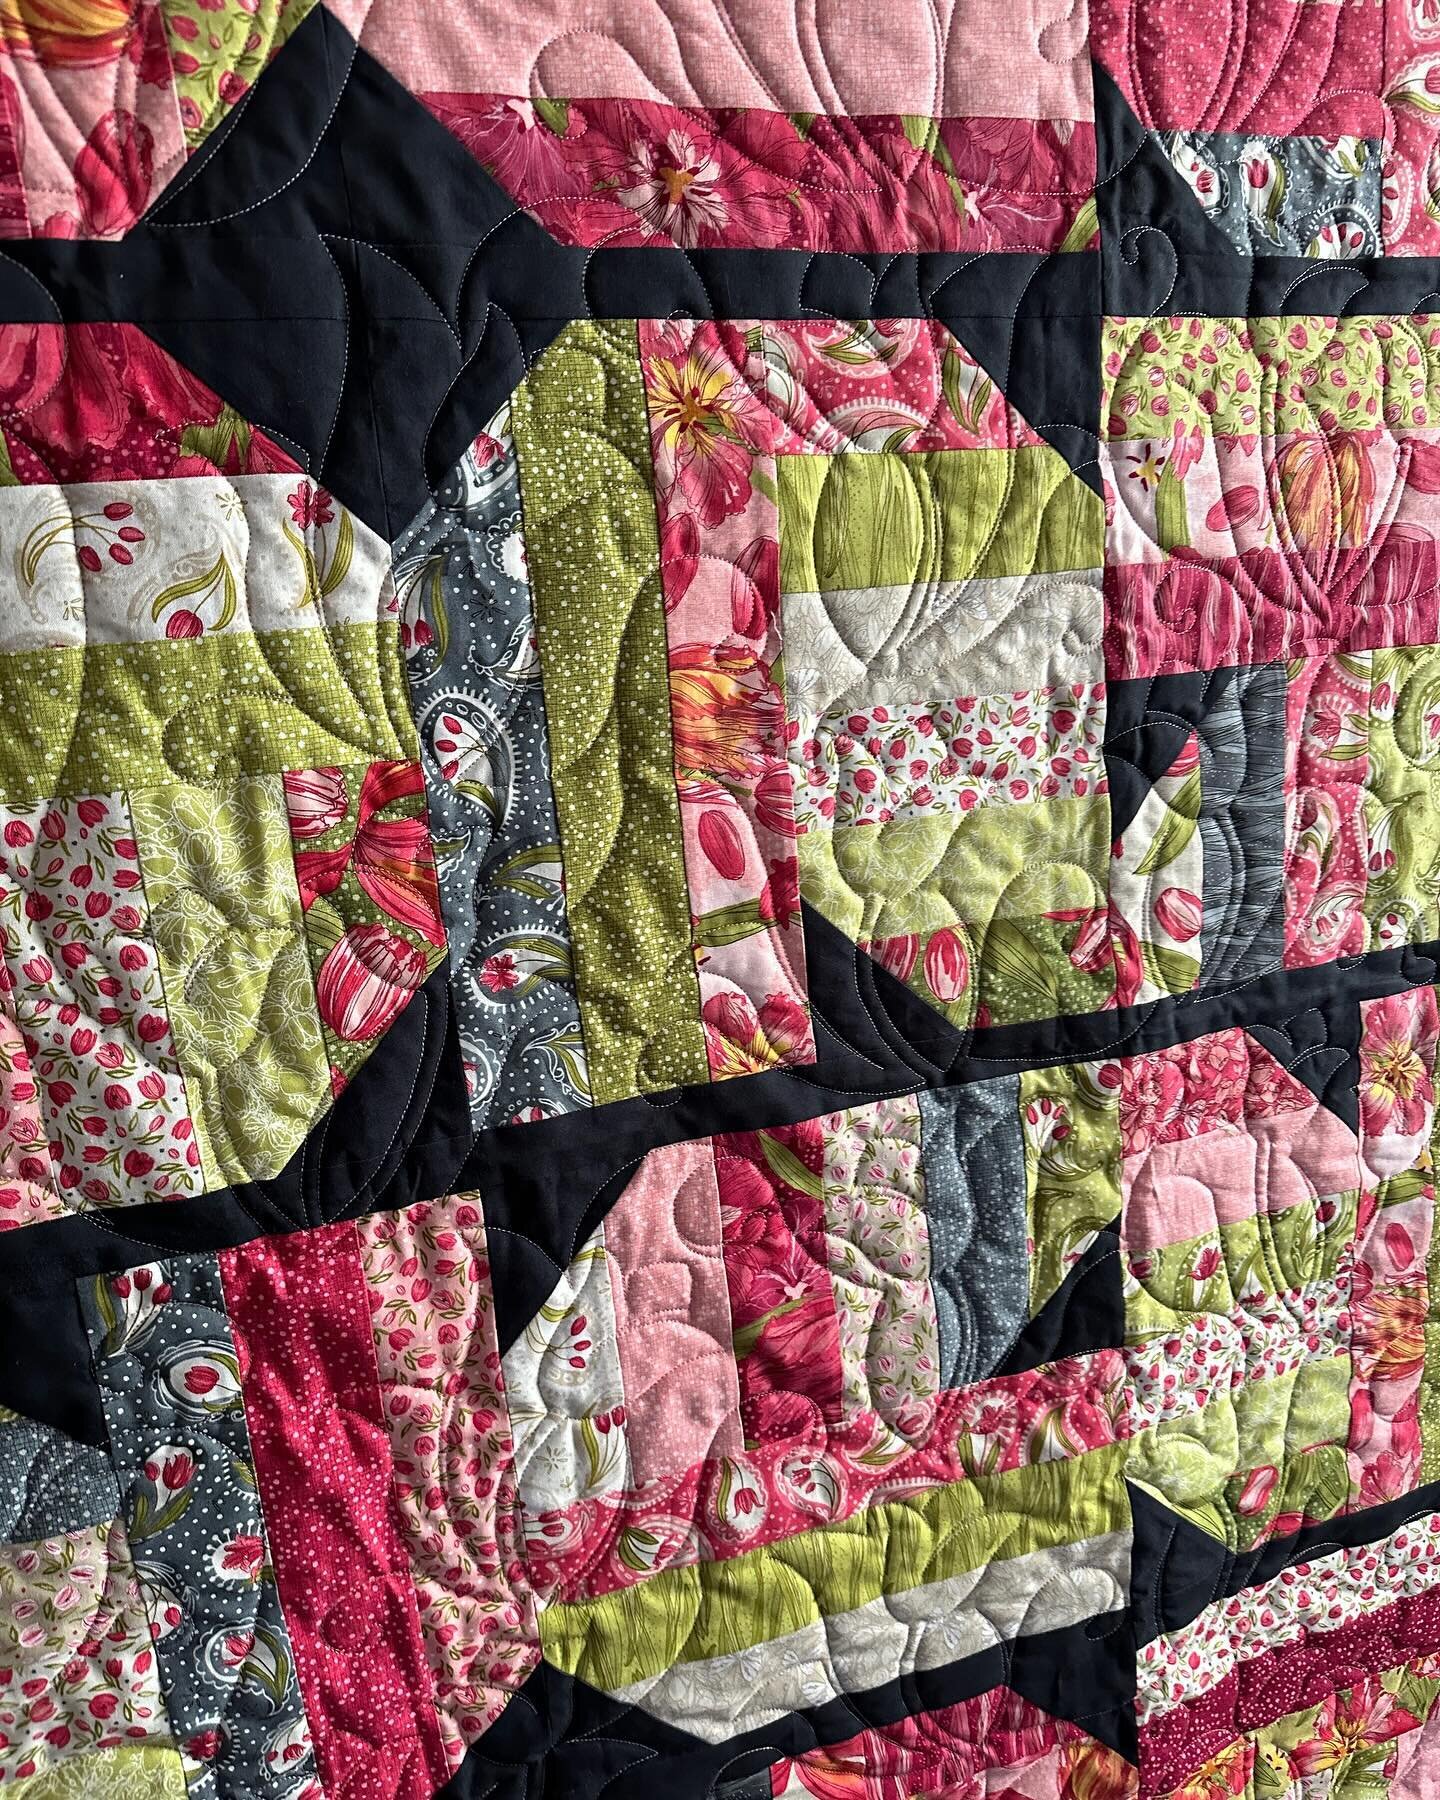 What&rsquo;s better than a lovely quilt to keep you cozy on a winters day? A springtime inspired quilt! This quilt pattern is a modern tulip, and we quilted it with tulips and warm gray cuddle. 
What types of flowers would you like to see quilted? Te